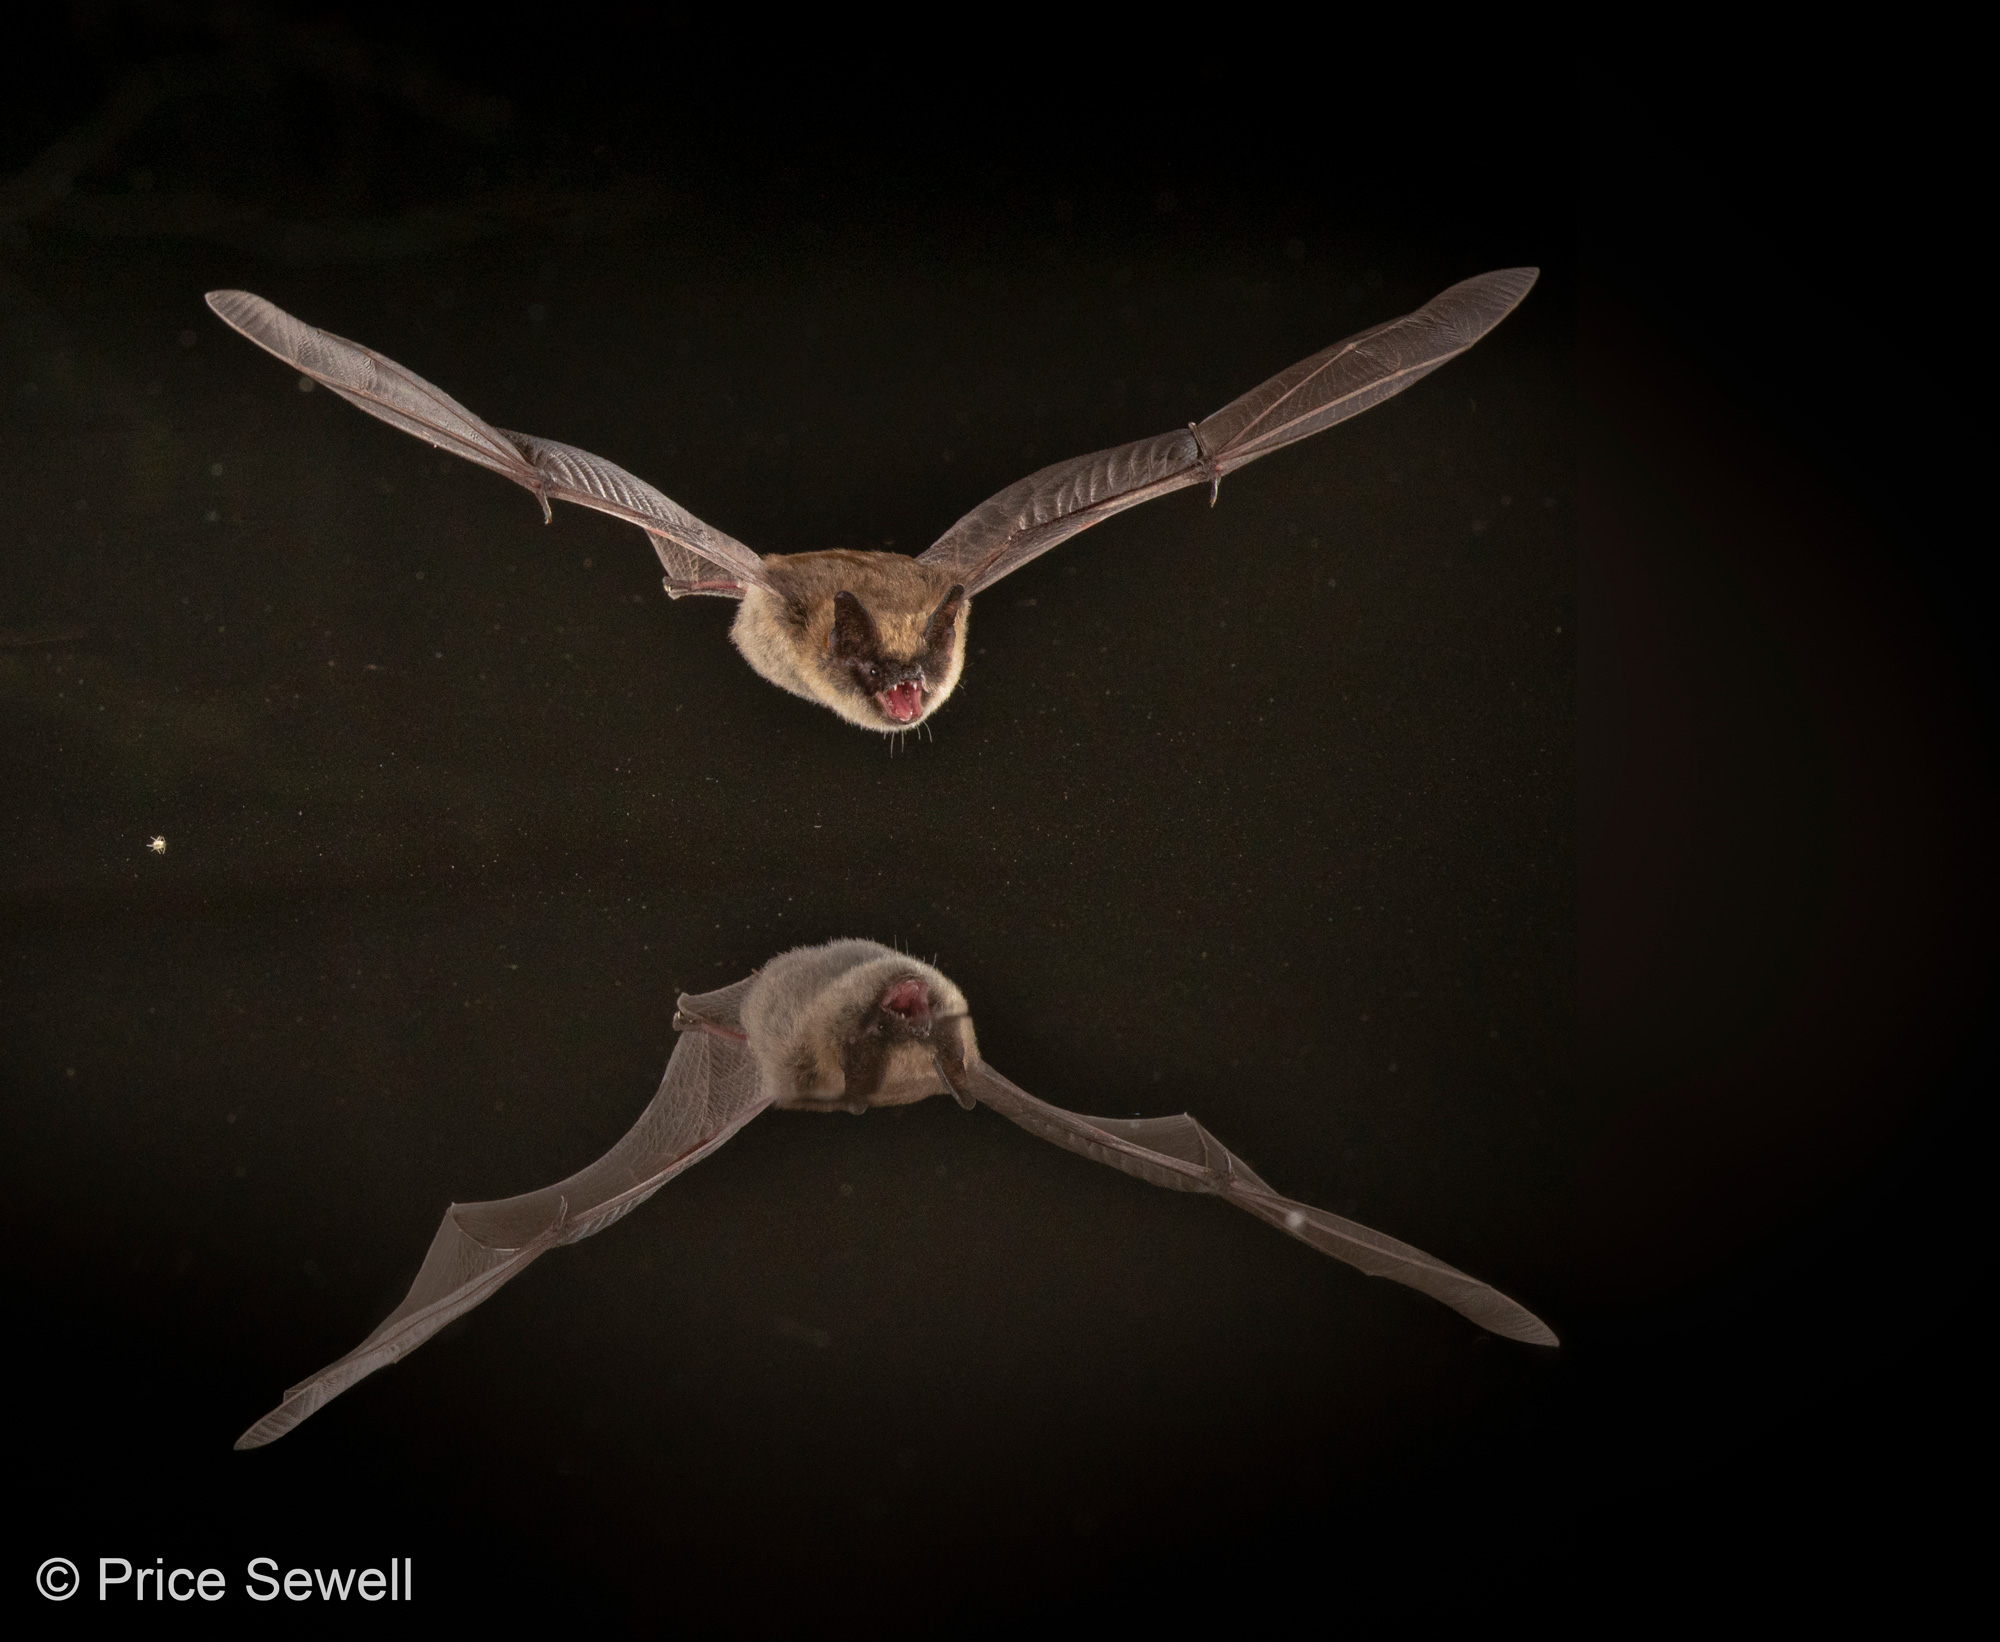 Price Sewell - eastern small footed bat